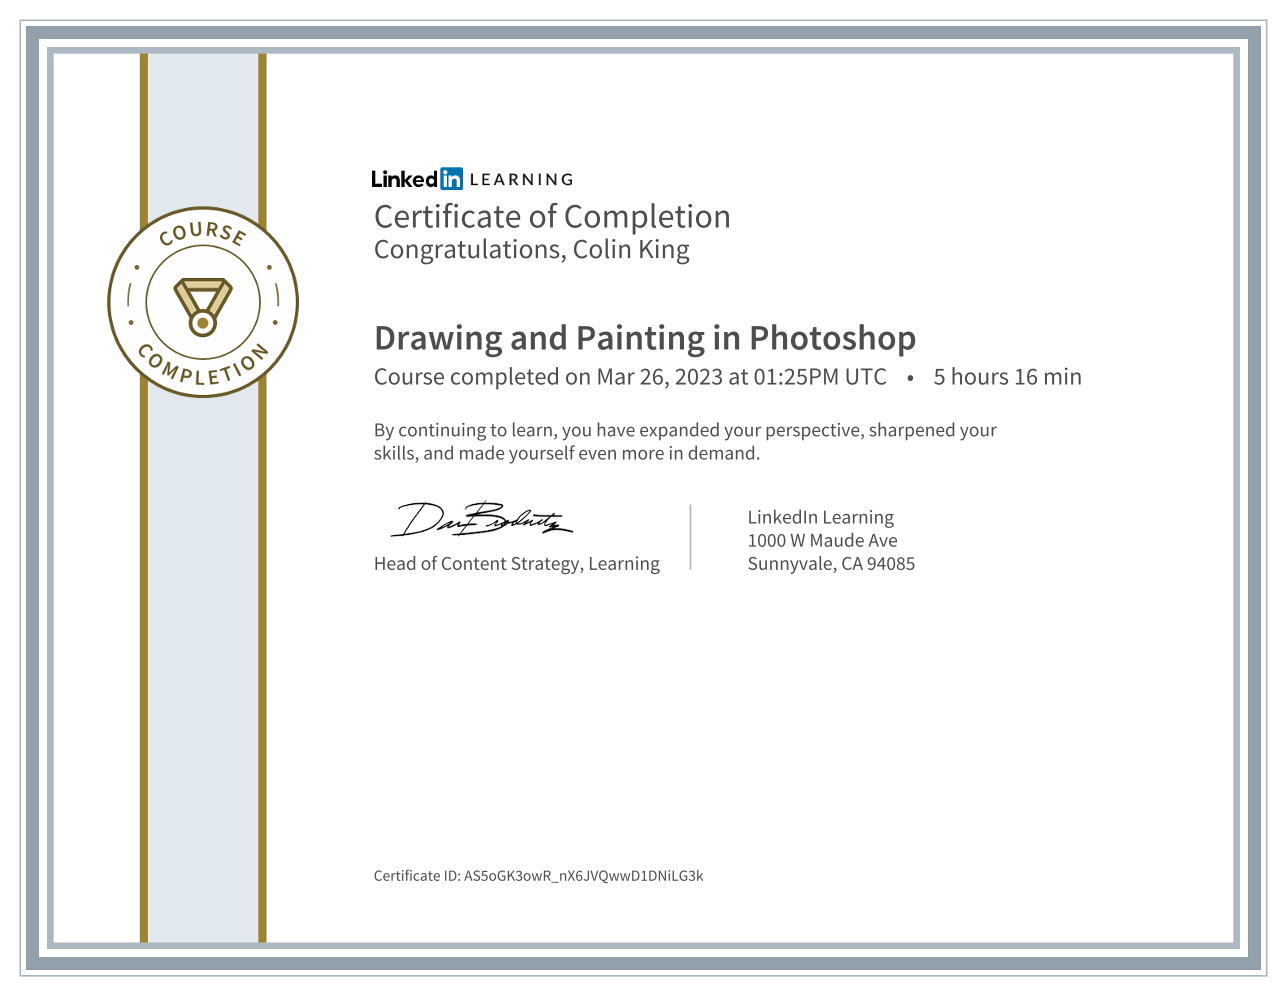 Drawing and Painting in Photoshop certificate